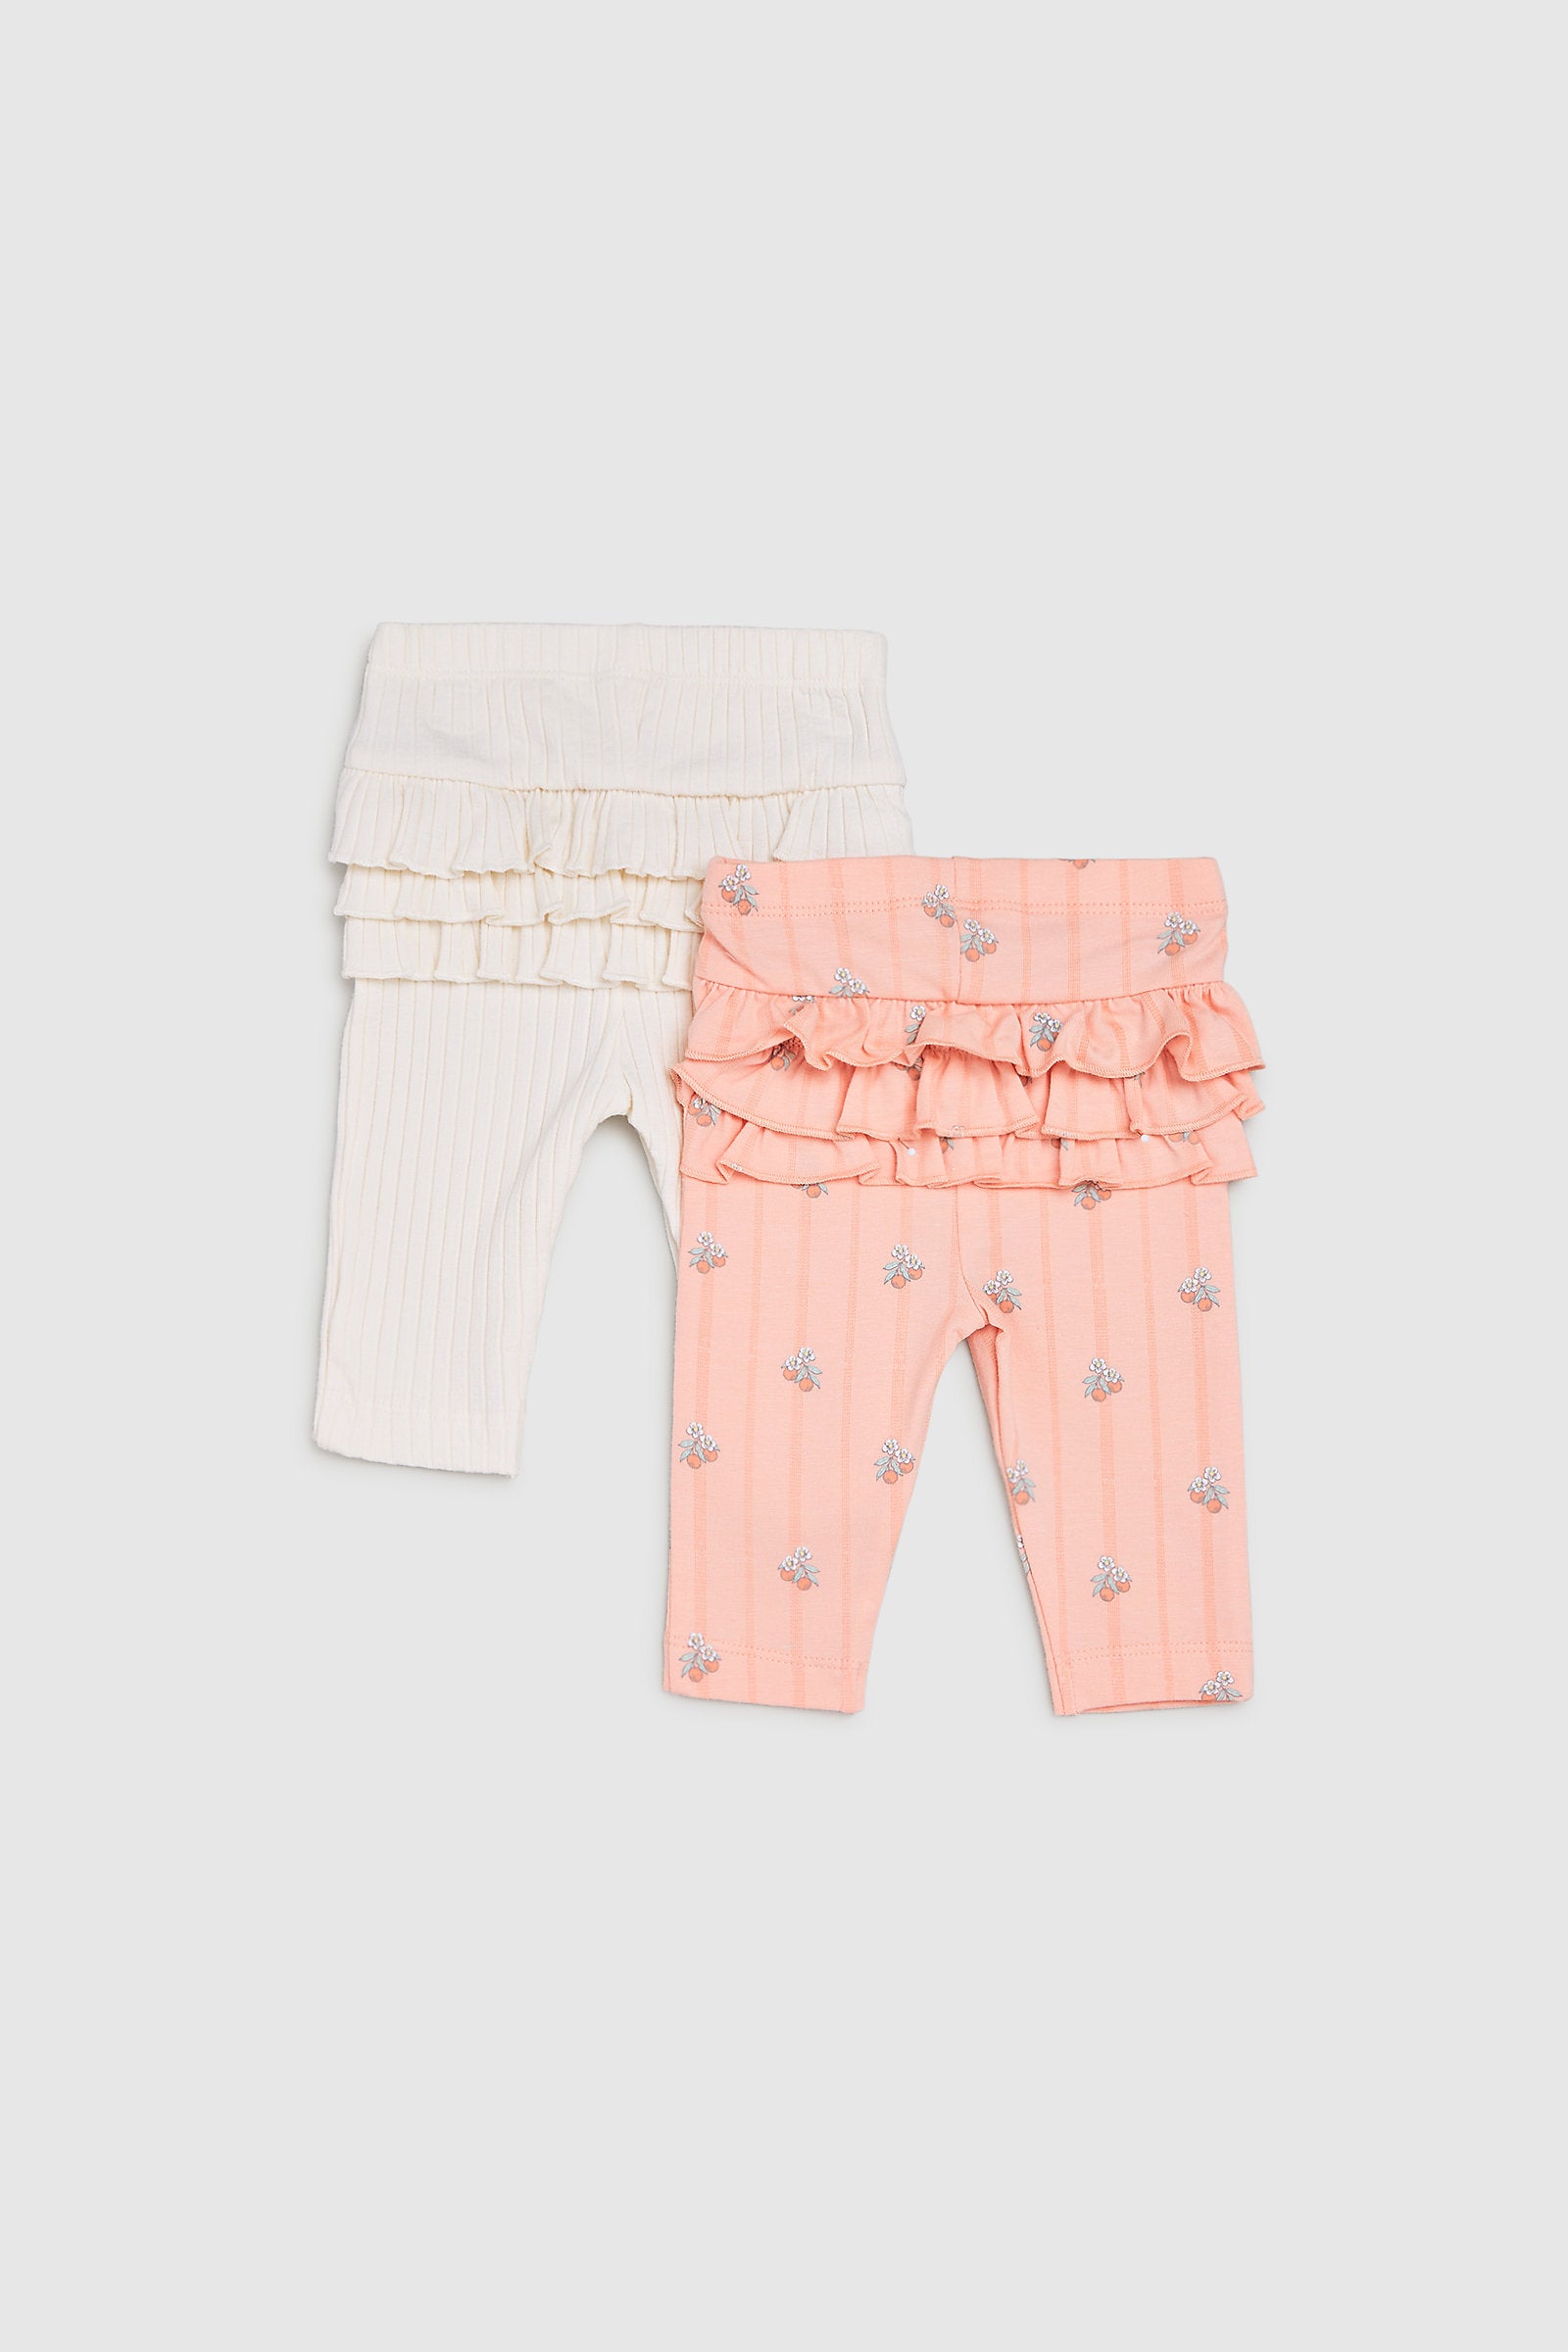 Mothercare Orchard Frill Leggings - 2 Pack